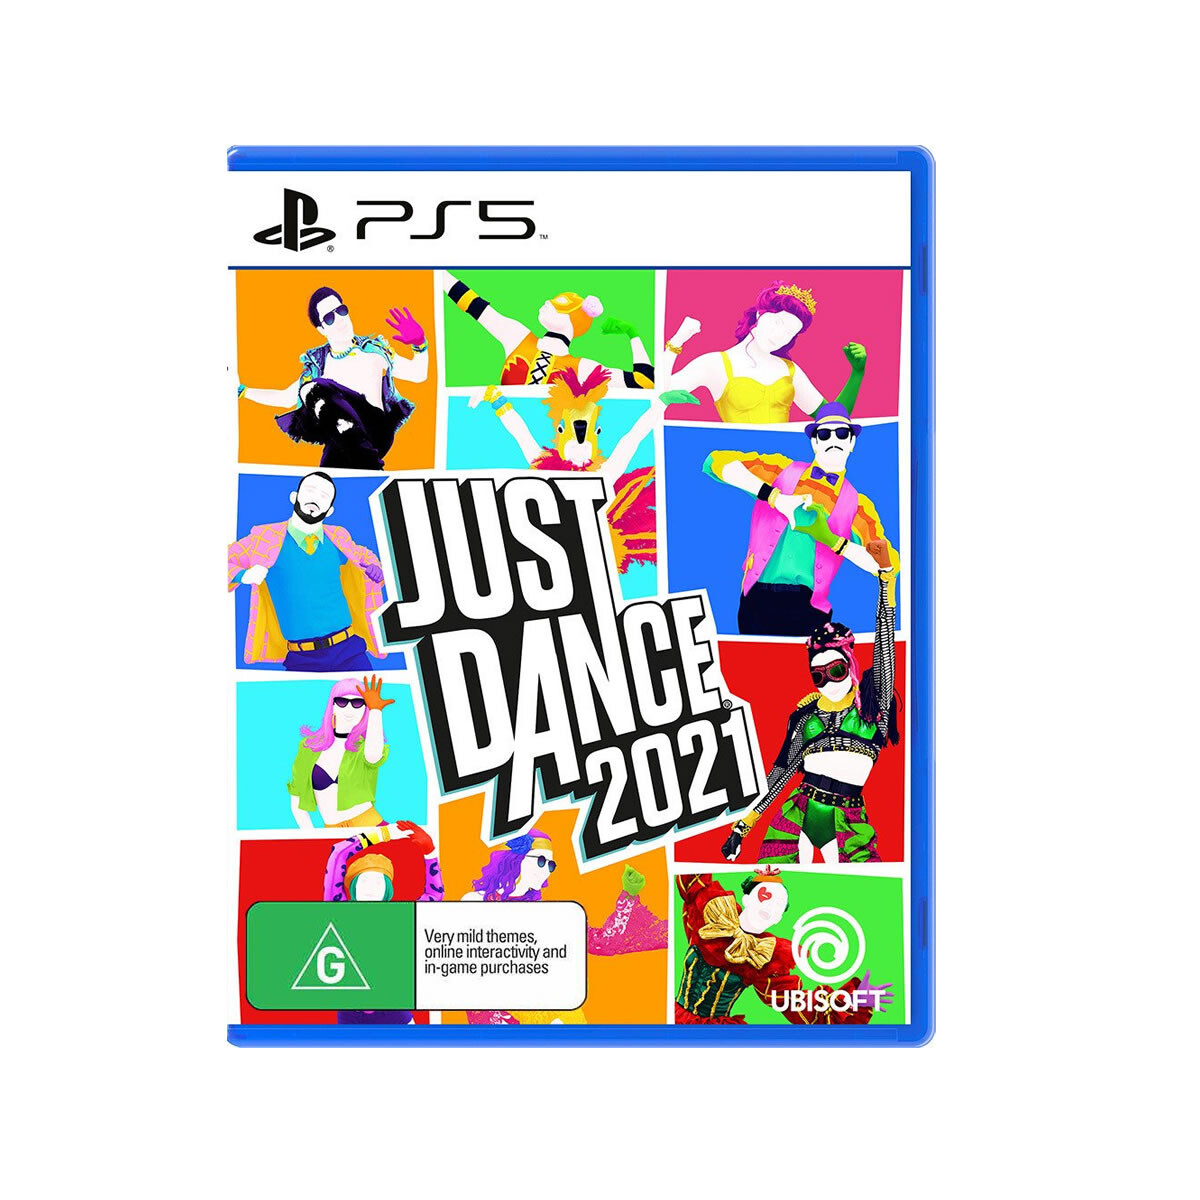 PS5 Just Dance 2021 